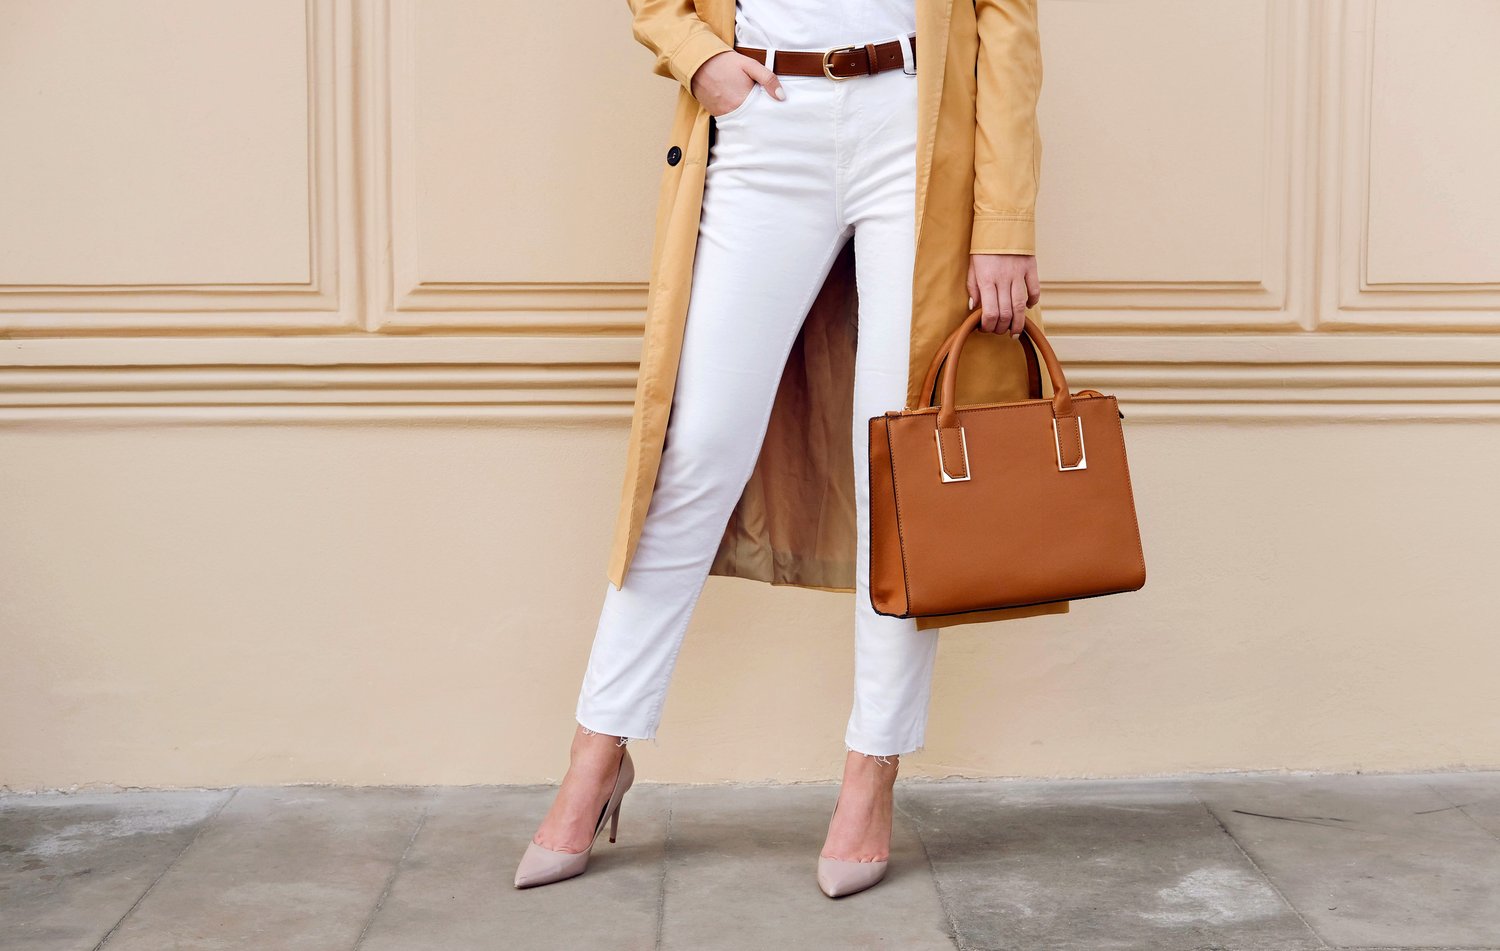 Why leather bags are a good investment